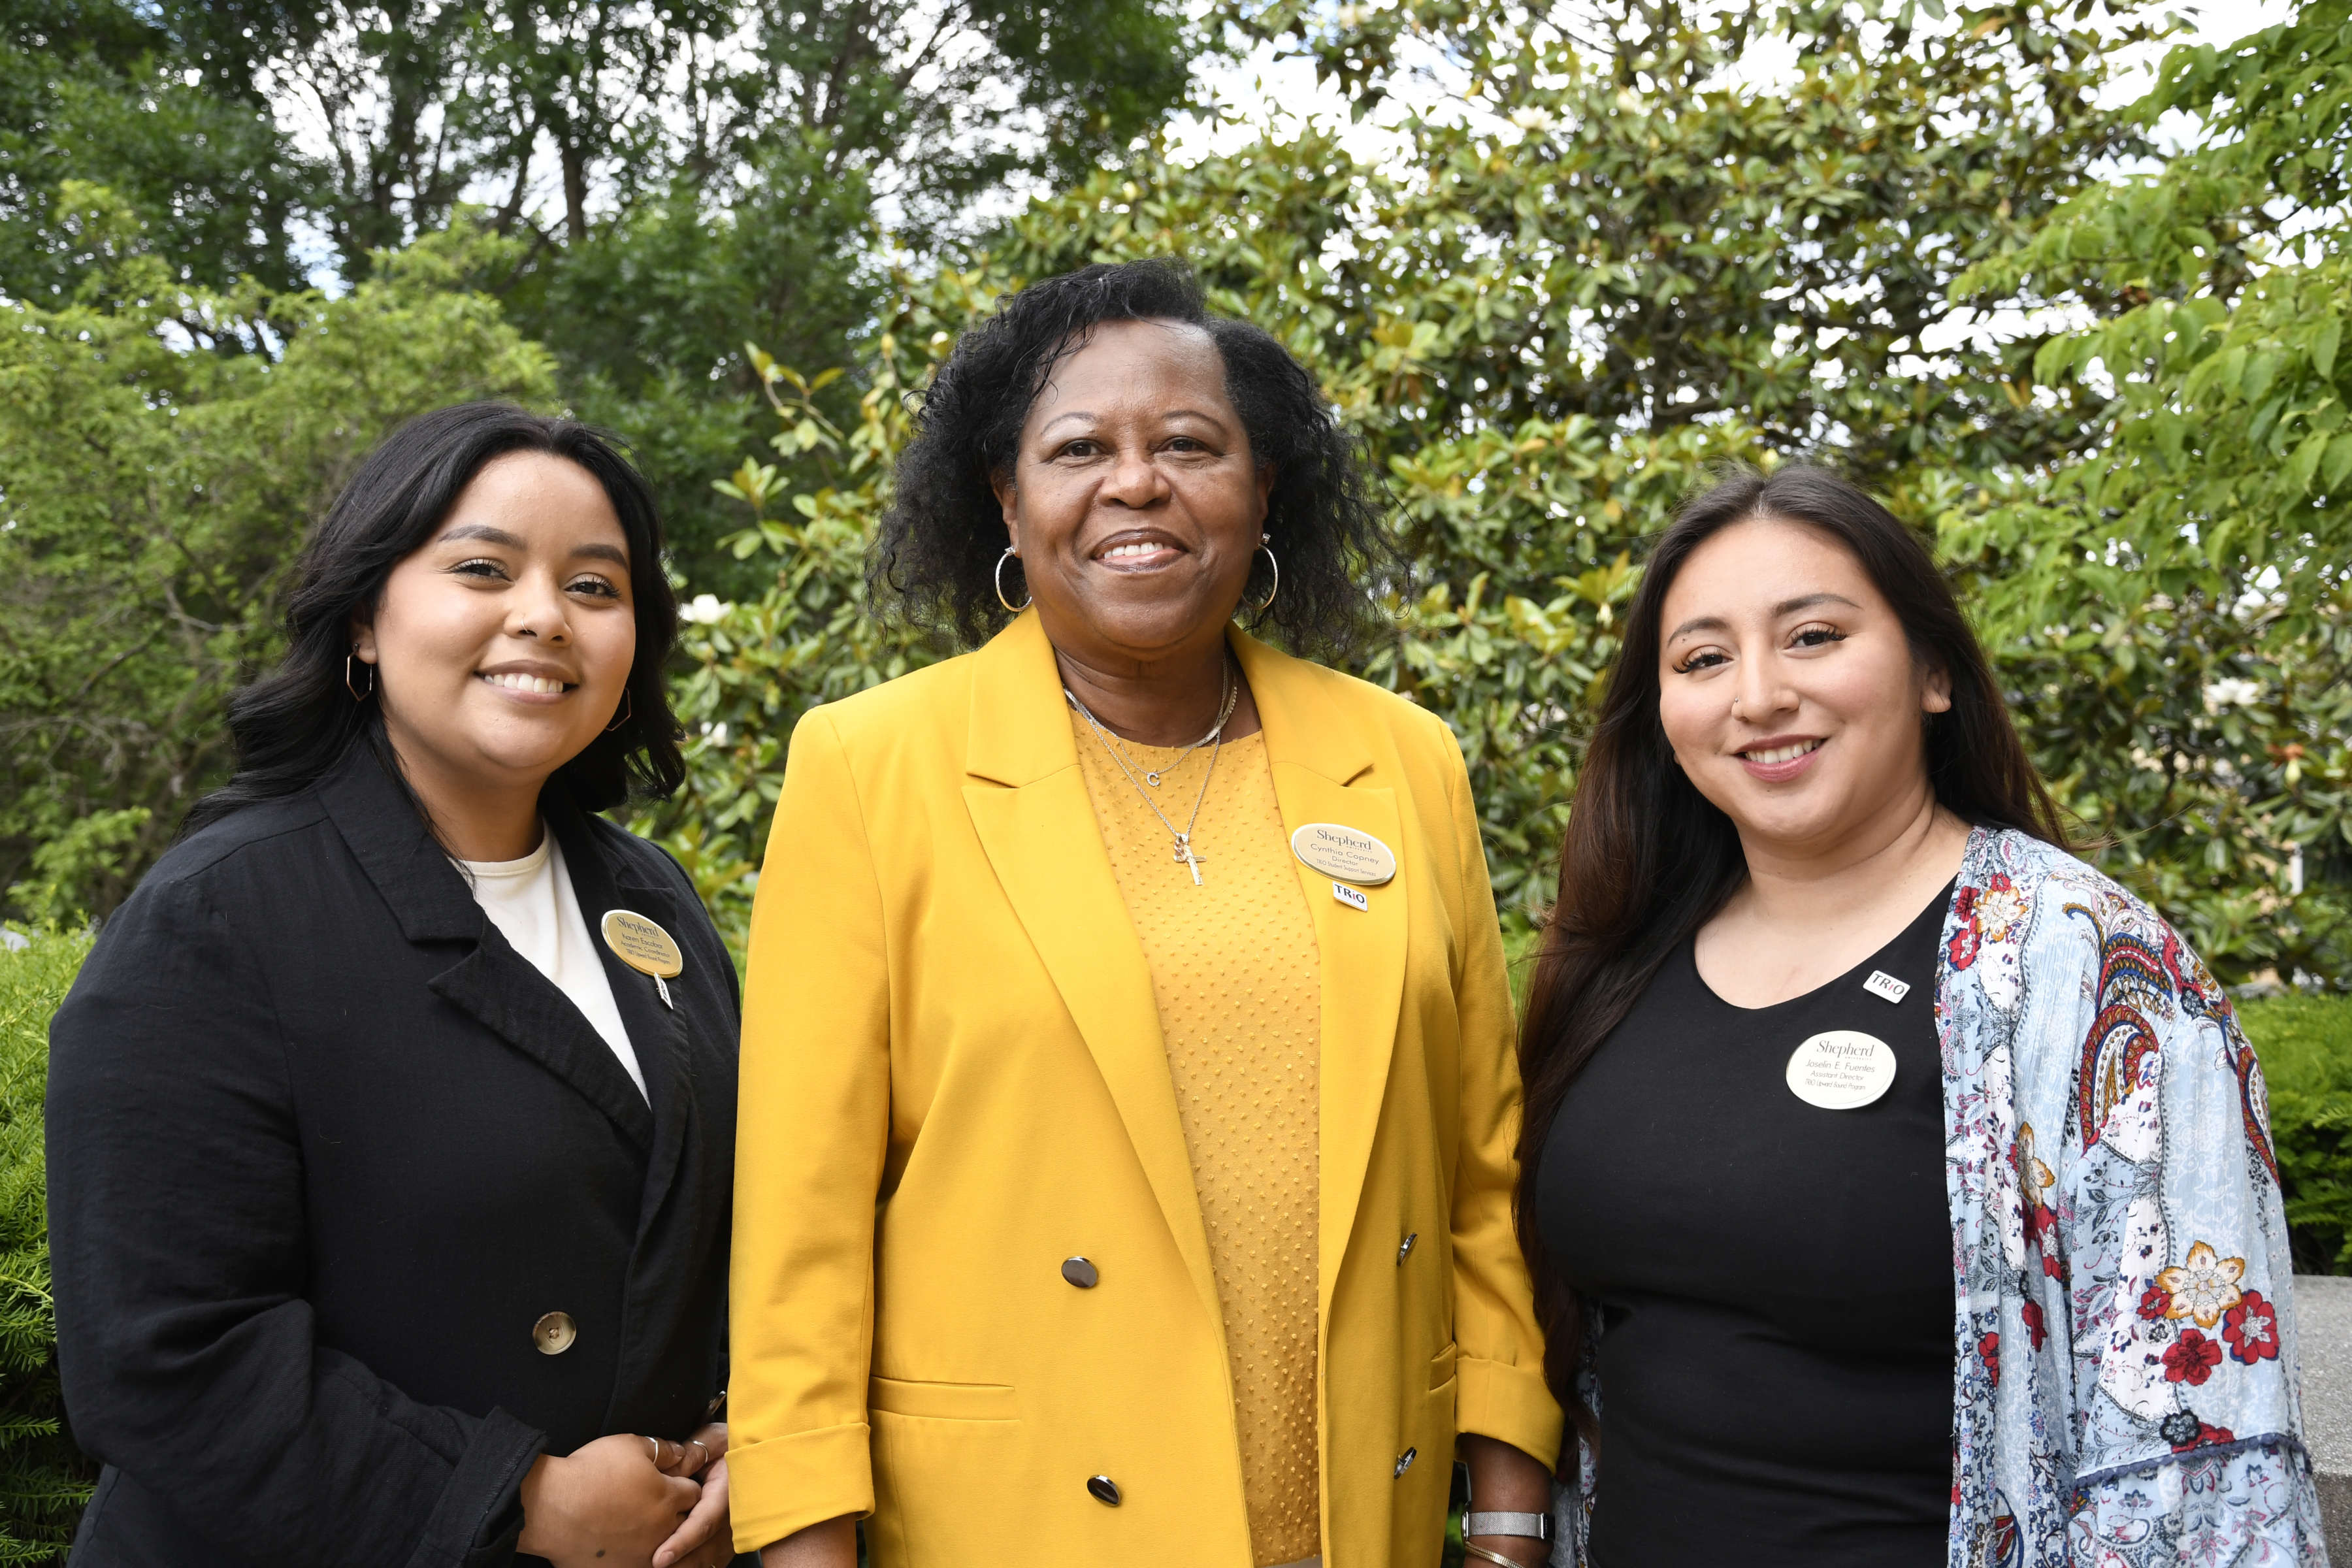 Photo of Karen Escobar, Cynthia Copney, and Joselin Fuentes smiling, looking at camera, in front of greenery